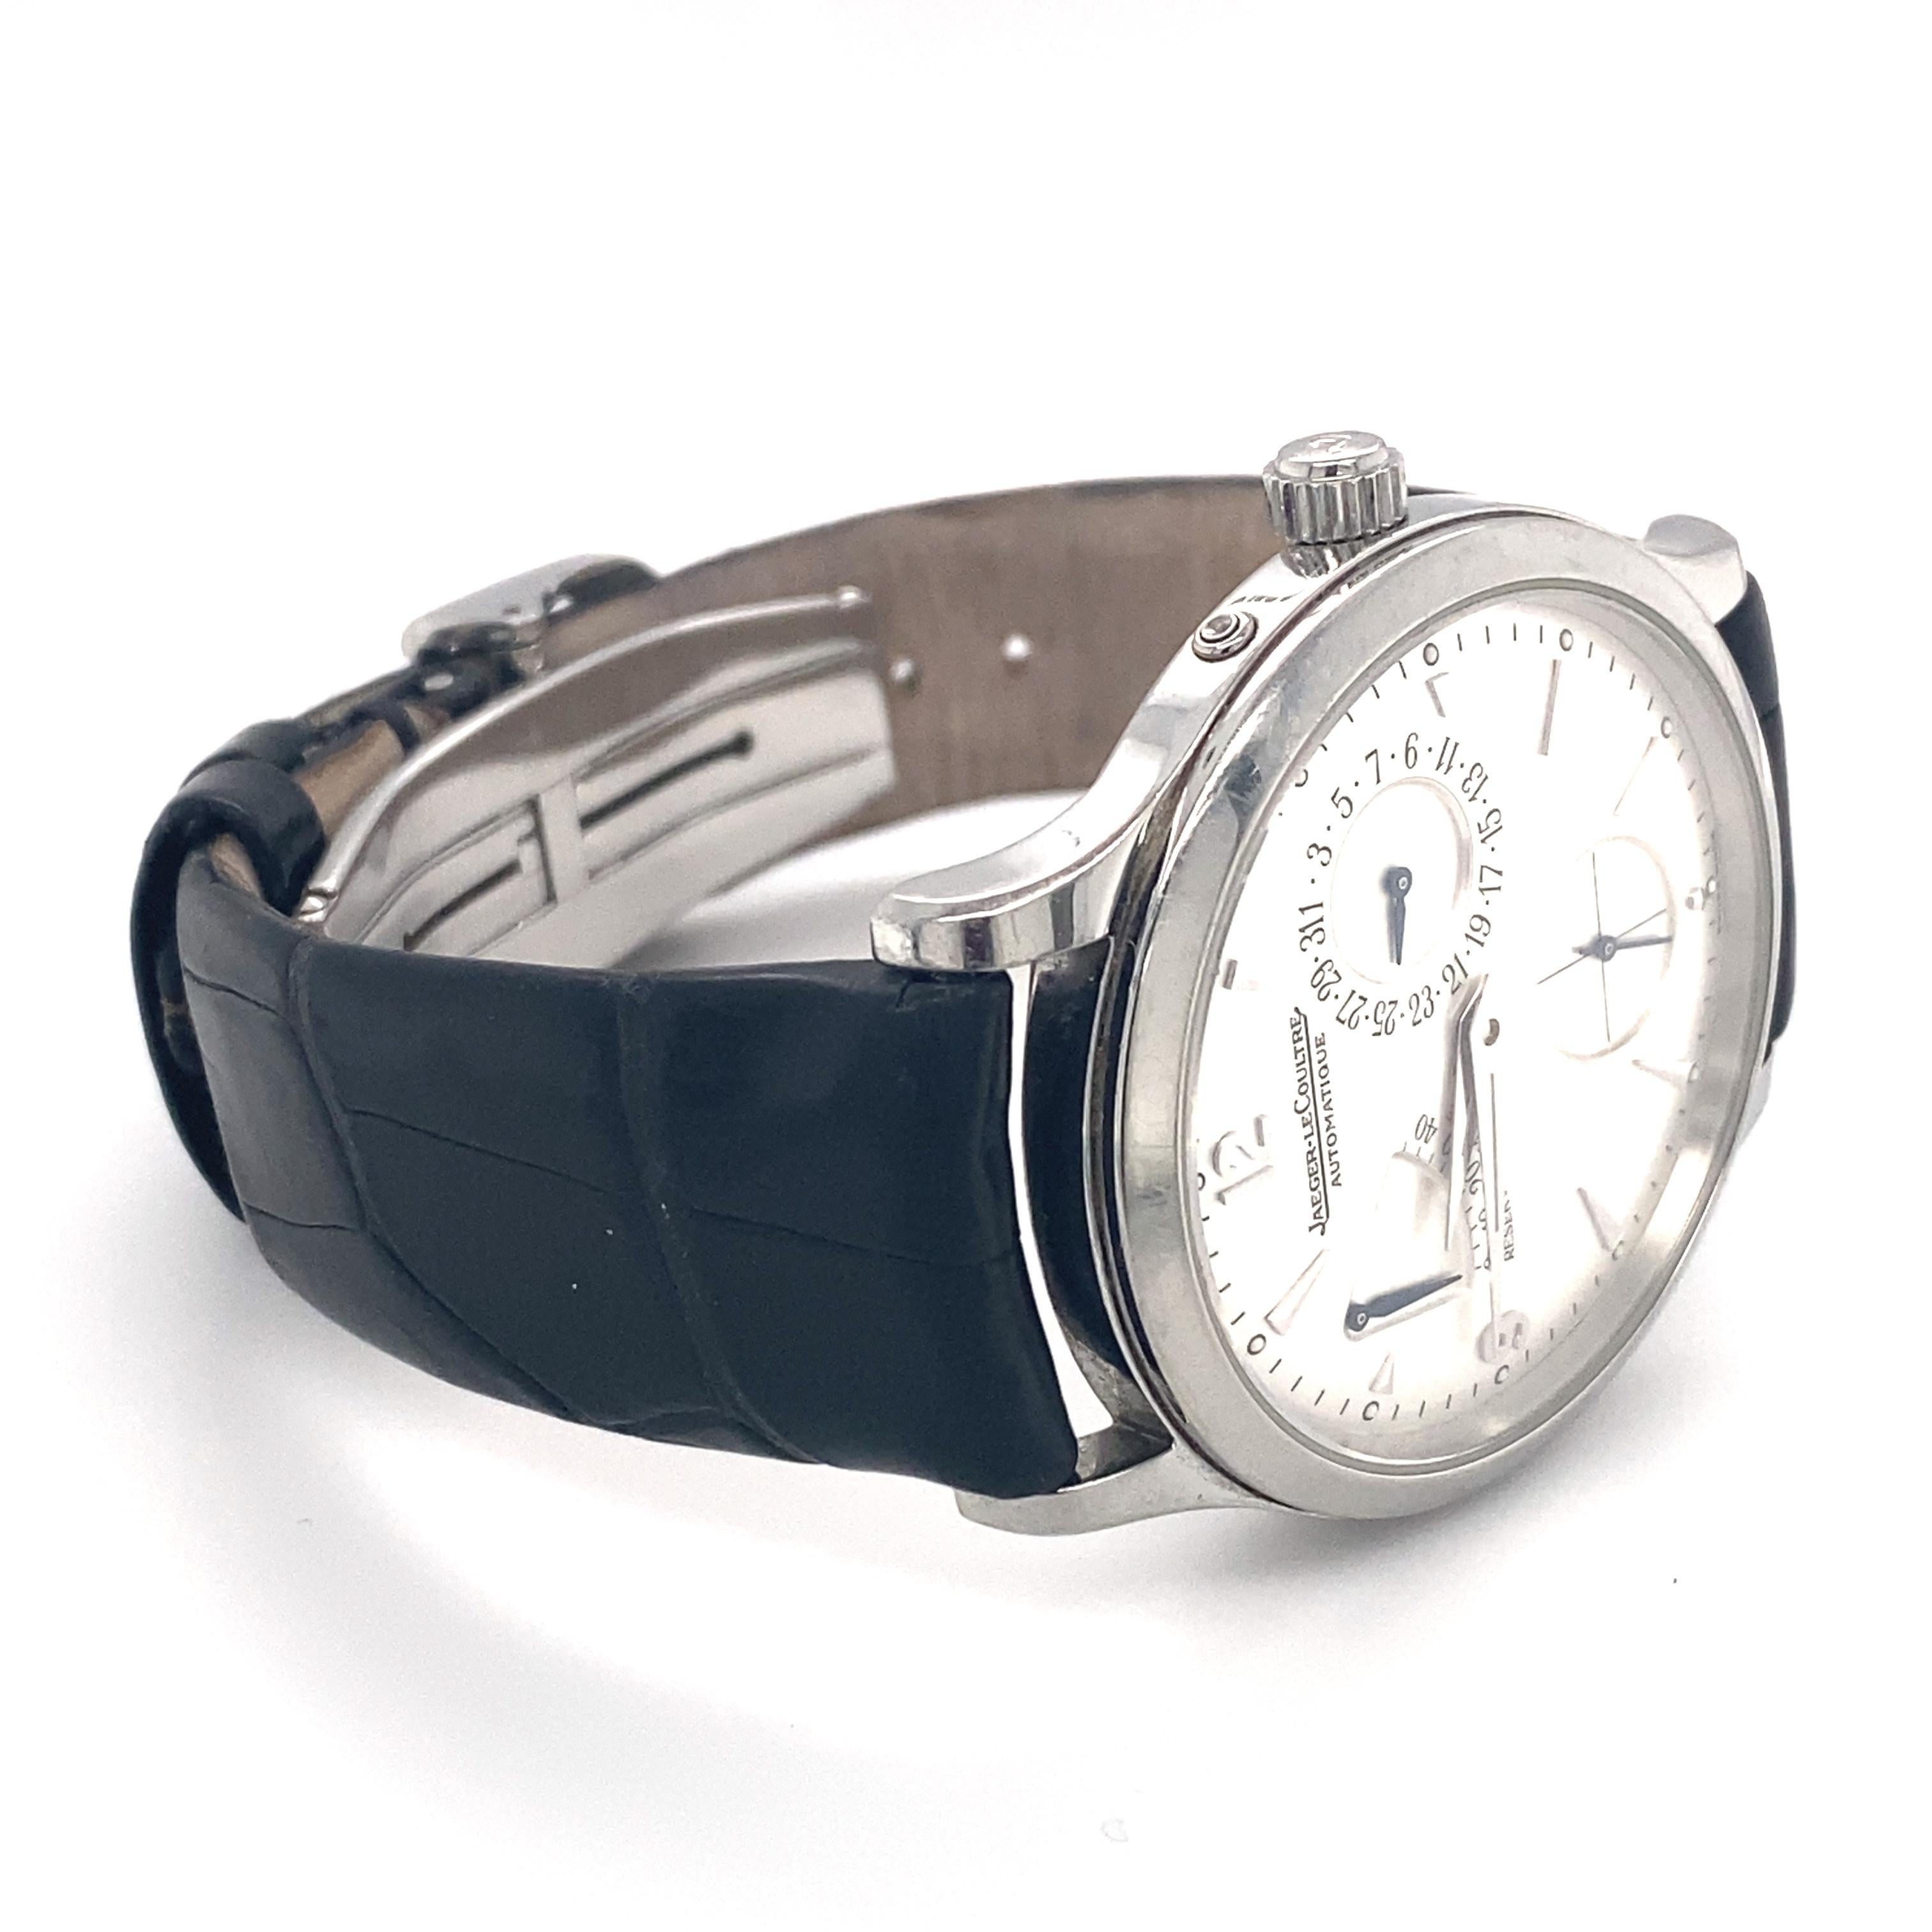 This mens' wrist watch by Jaeger-LeCoultre is the Master Ultra Thin model, in good quality with a pre-owned band. The band can be replaced by request.

Metal Type: Stainless steel
Dimensions: Case 39mm, length of band 8in
Movement: Manual
Origin: